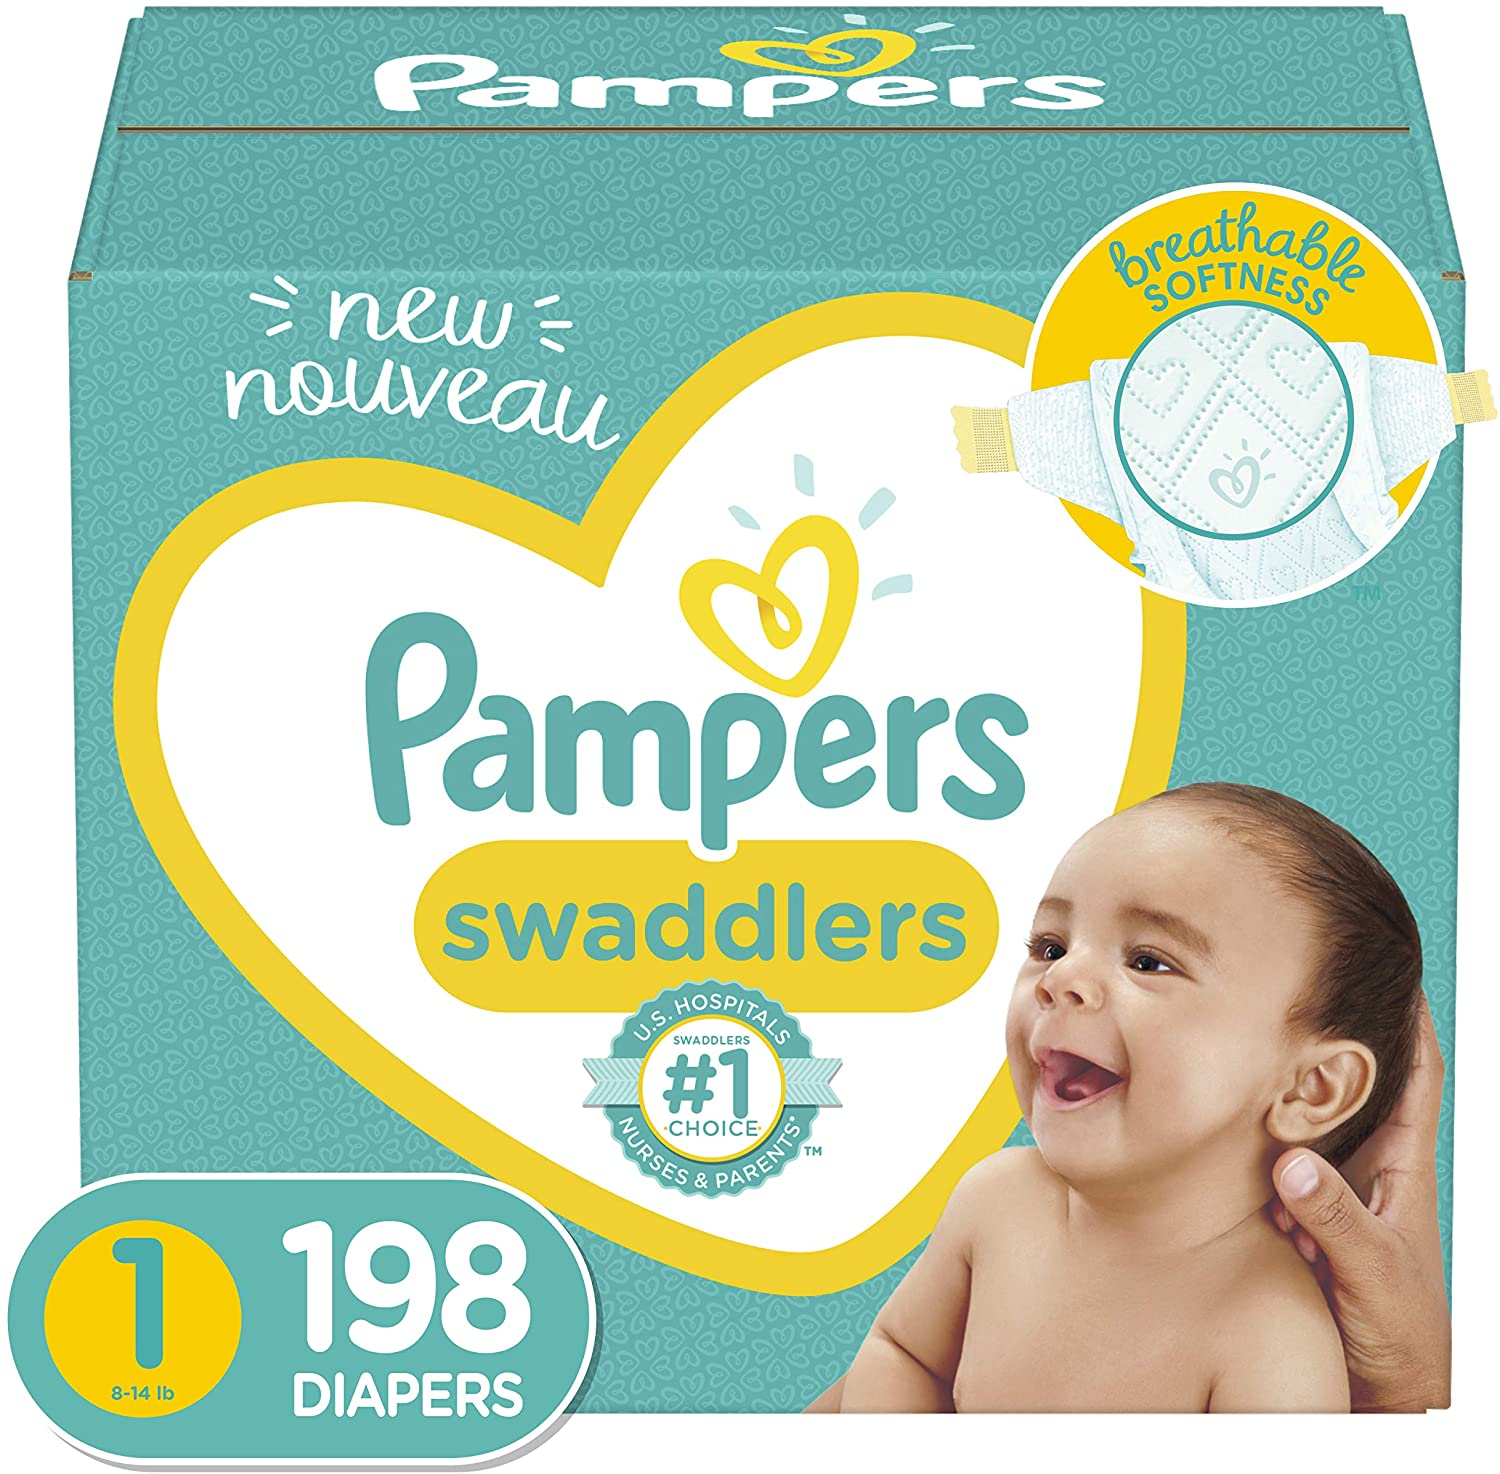 Spend $40+ on Select Pampers Diapers, Get $10 Prime Video Credit